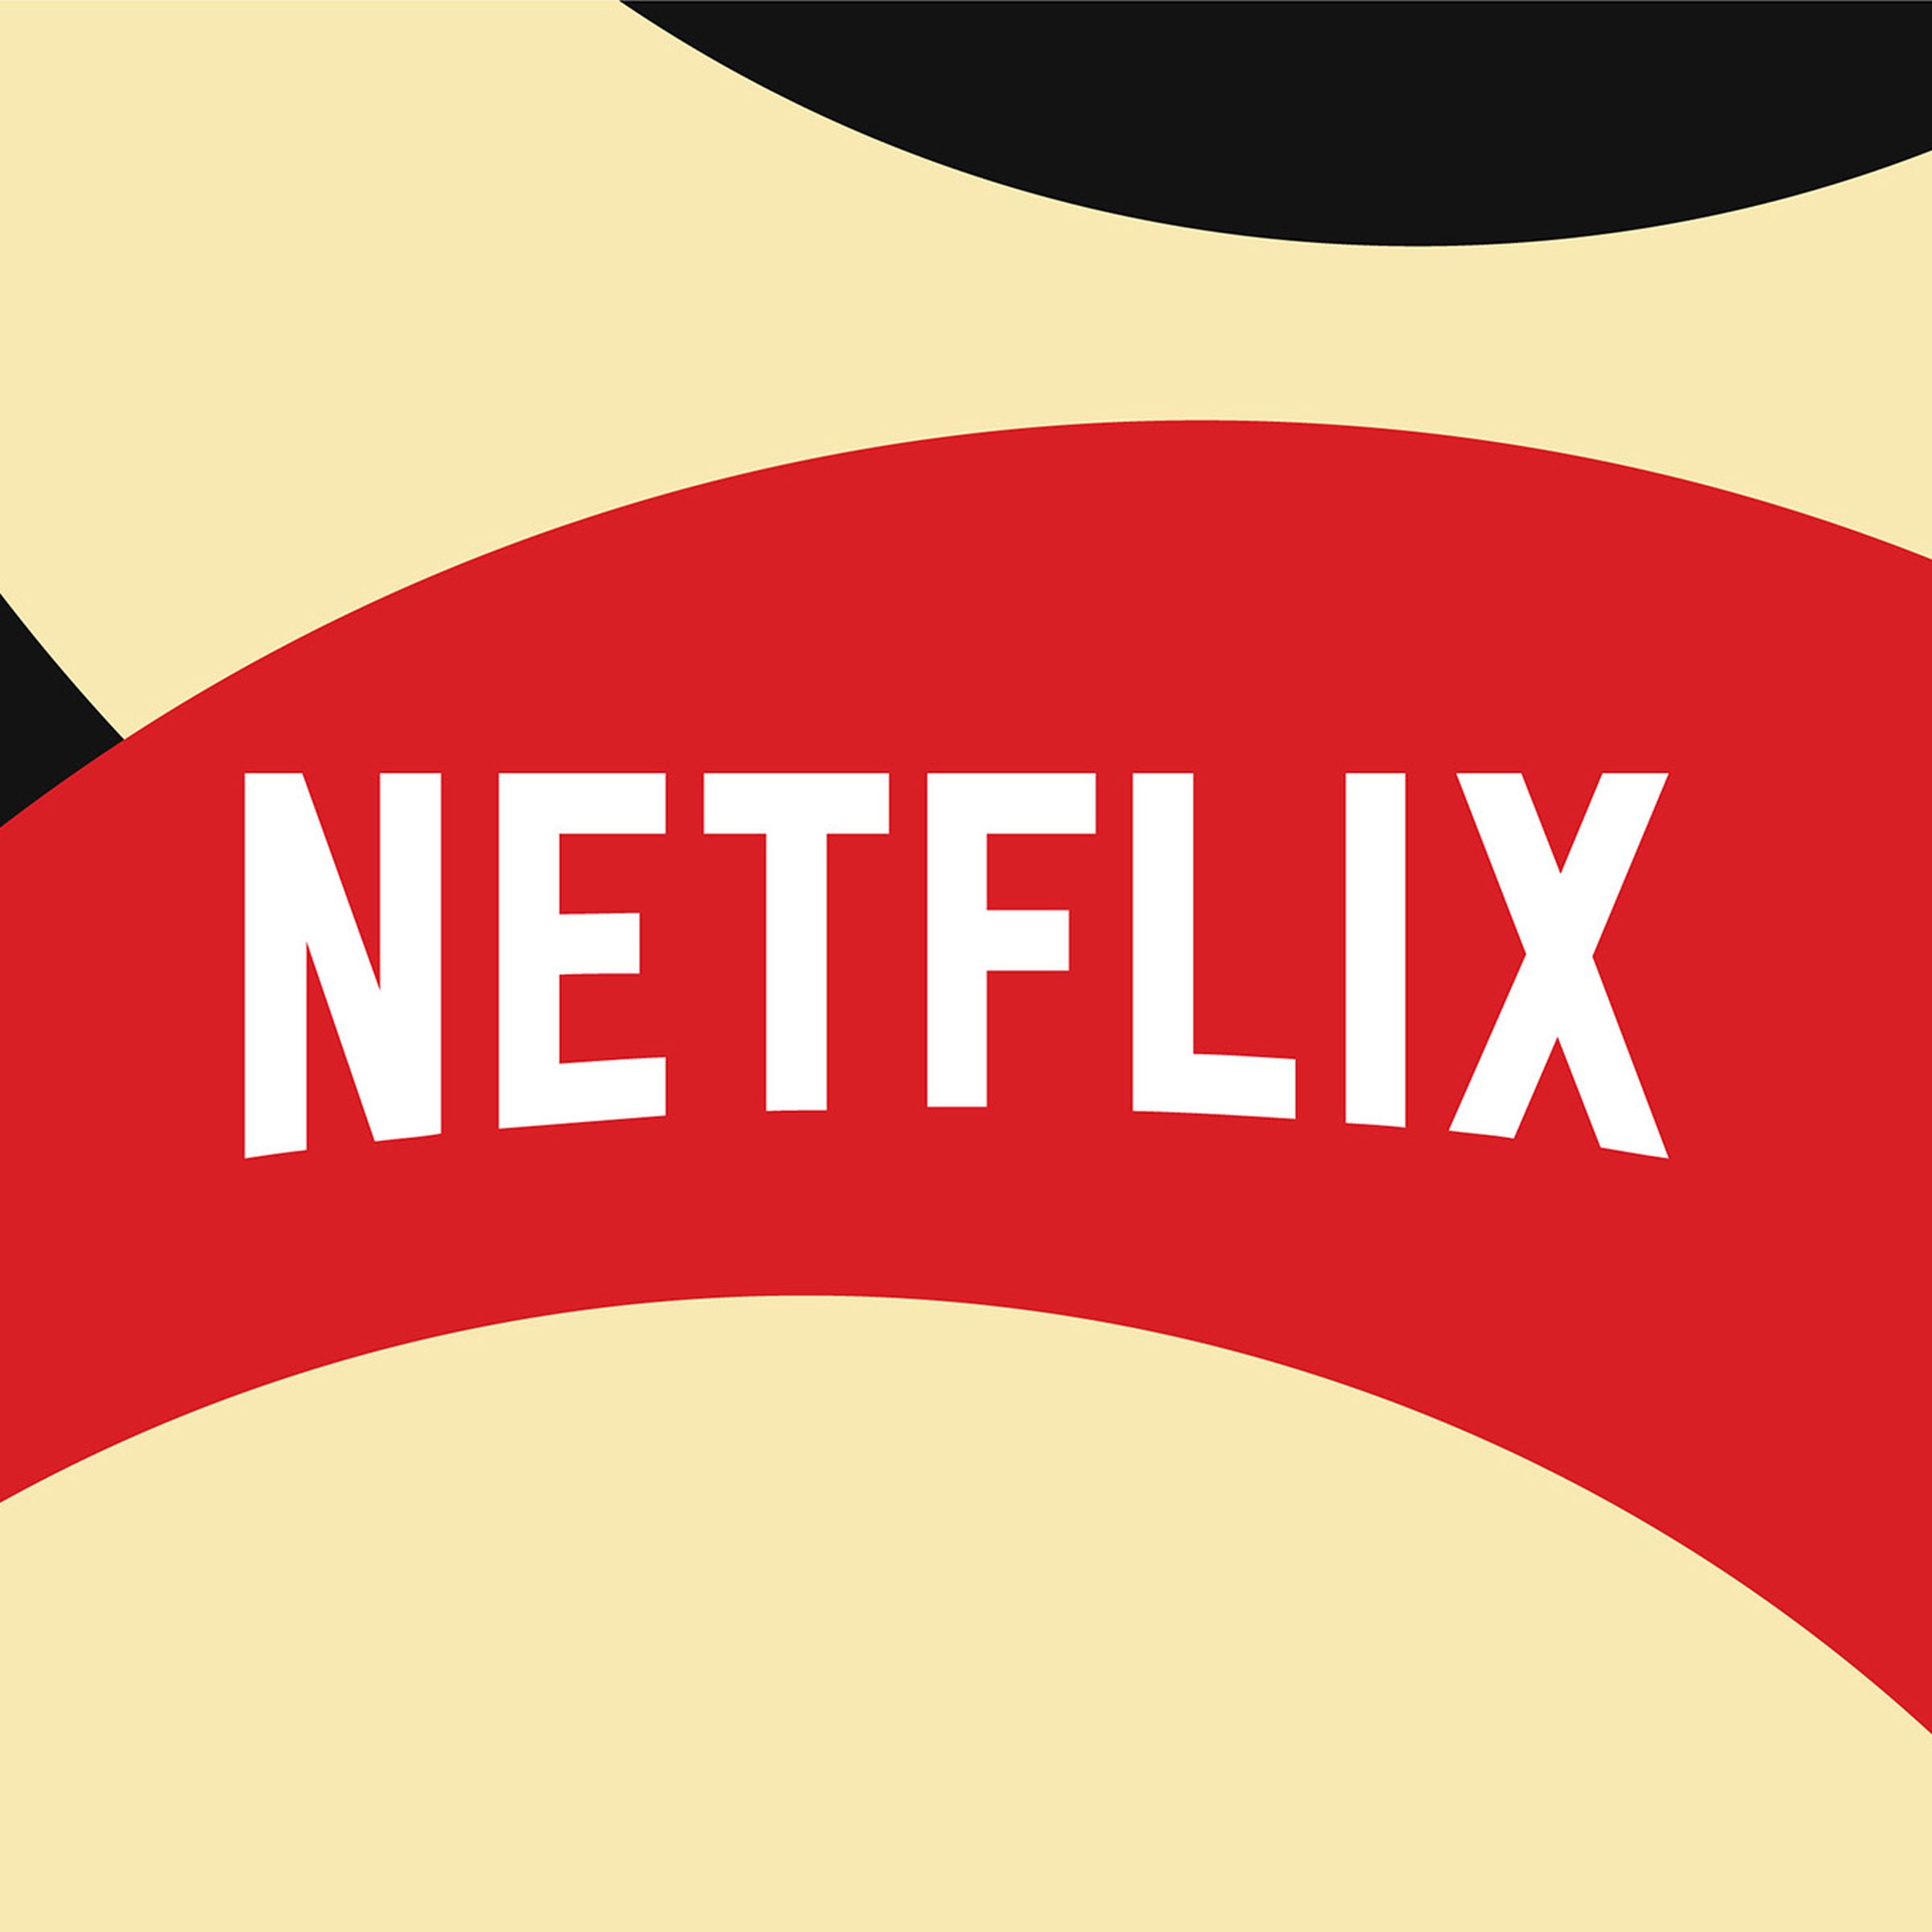 Netflix’s logo on a black and yellow background